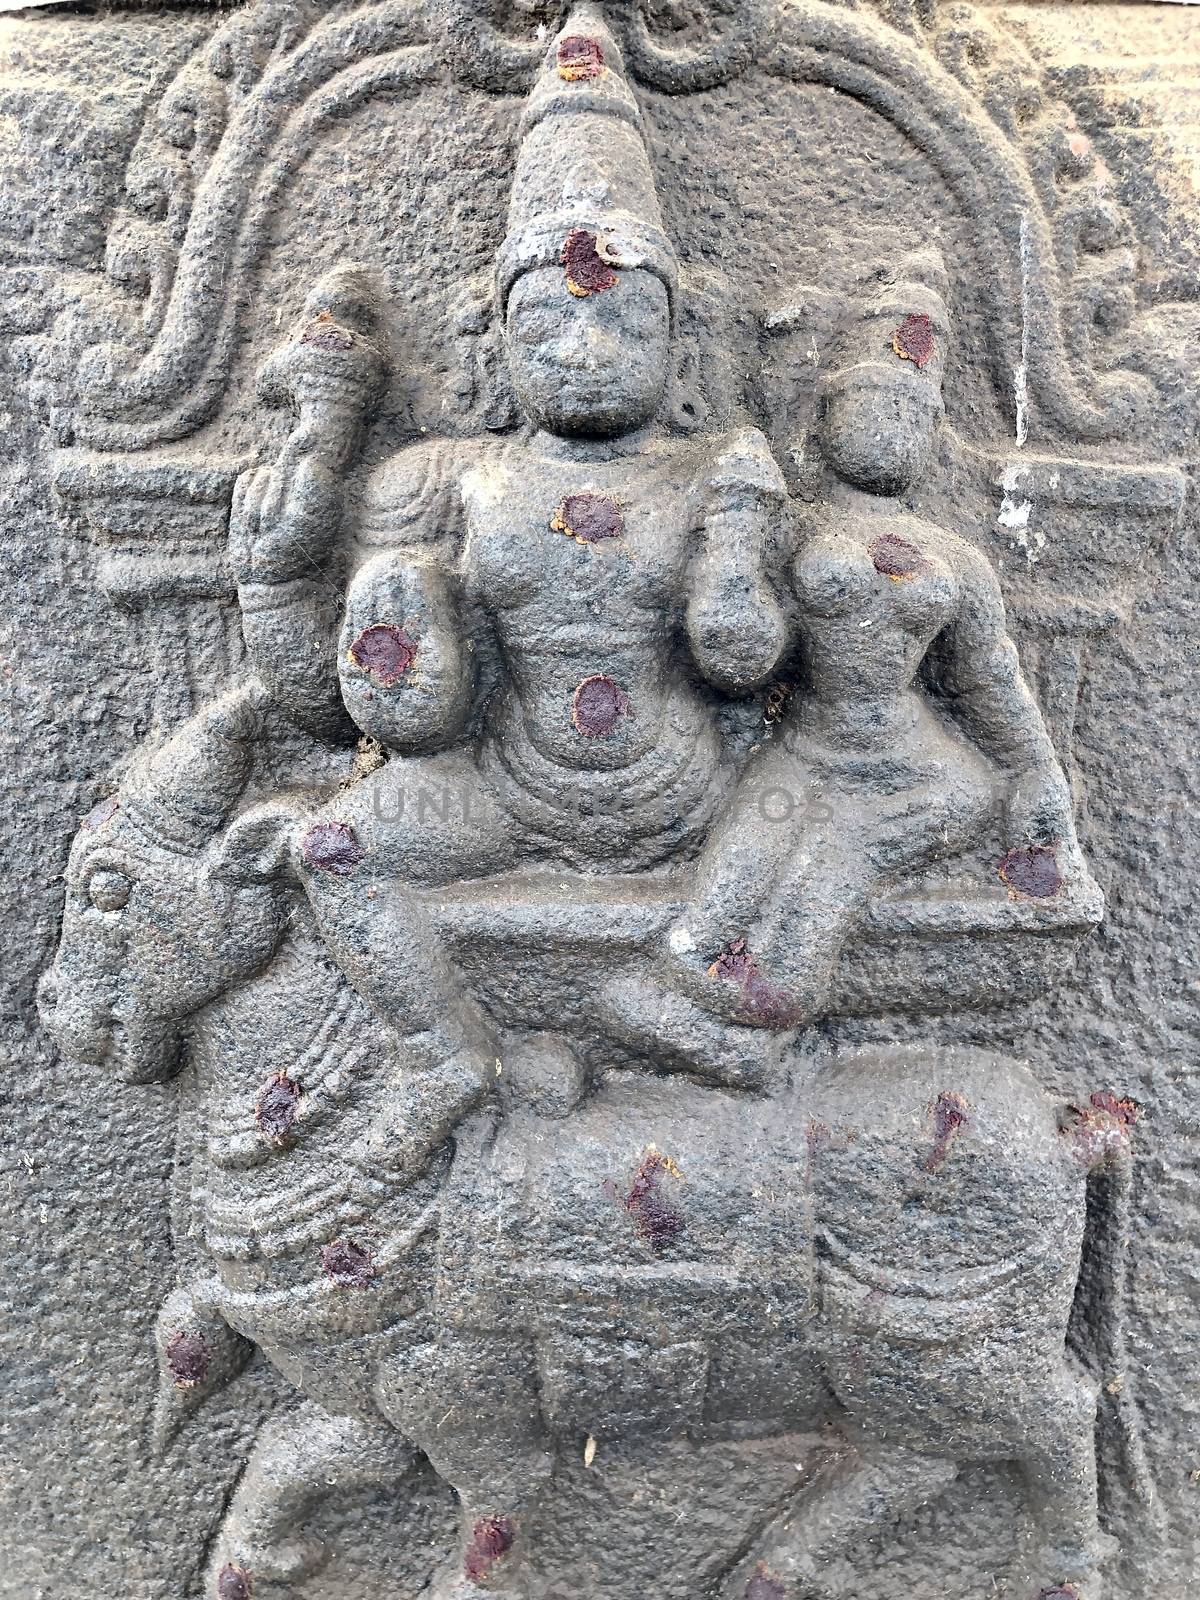 Lord Shiva and Parvati sitting at the top of a bull sculpture. Bas relief sculpture carved in the stone walls of Shiva temple, Tamil nadu by prabhakaran851